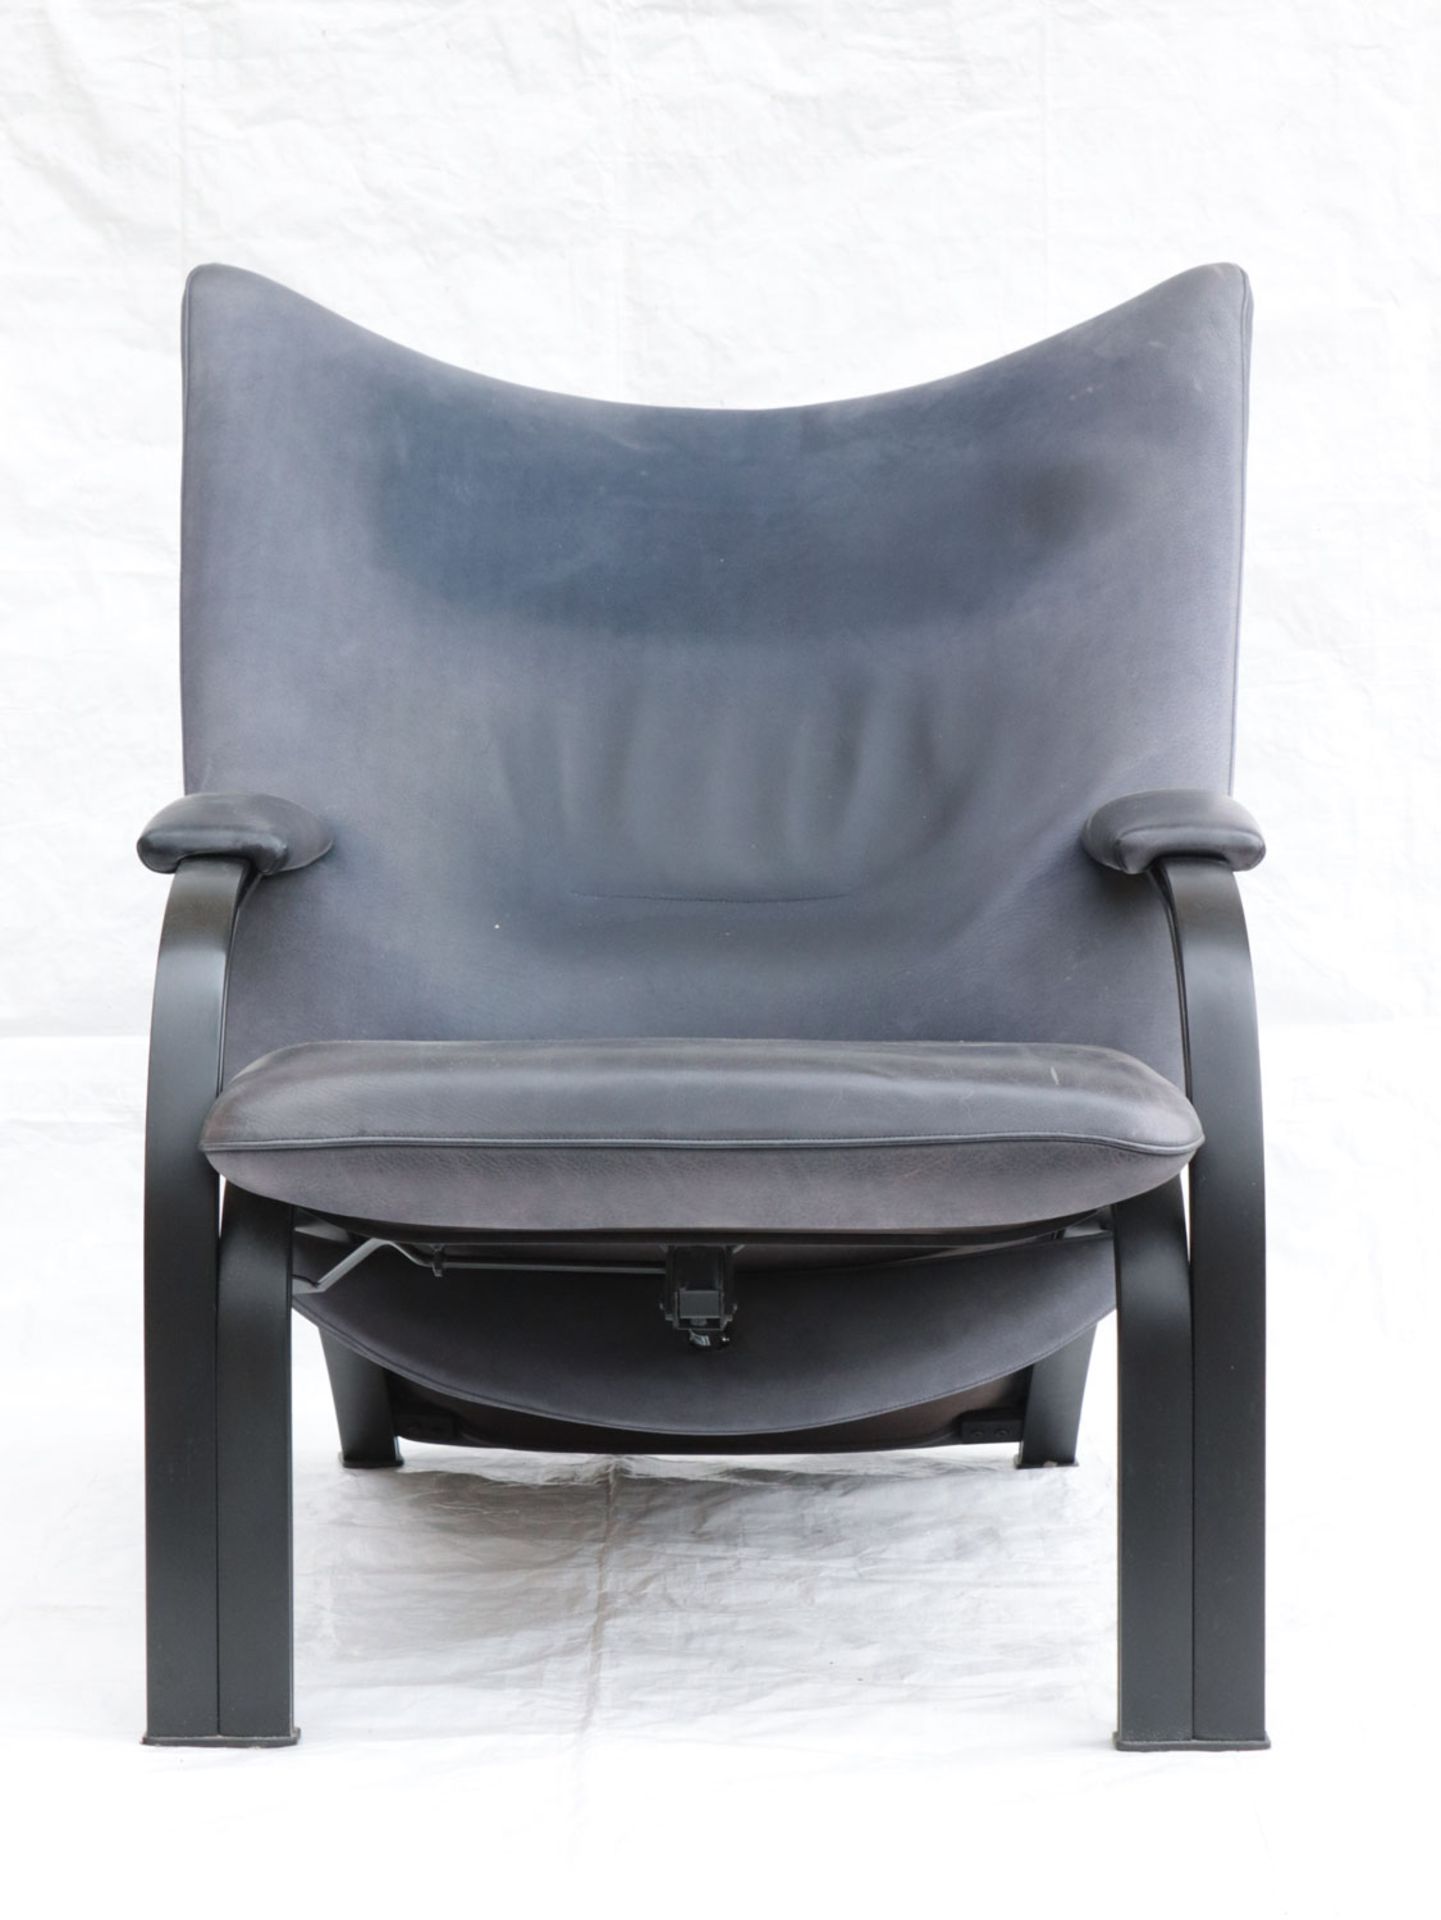 Design - Relaxchair - Image 11 of 13